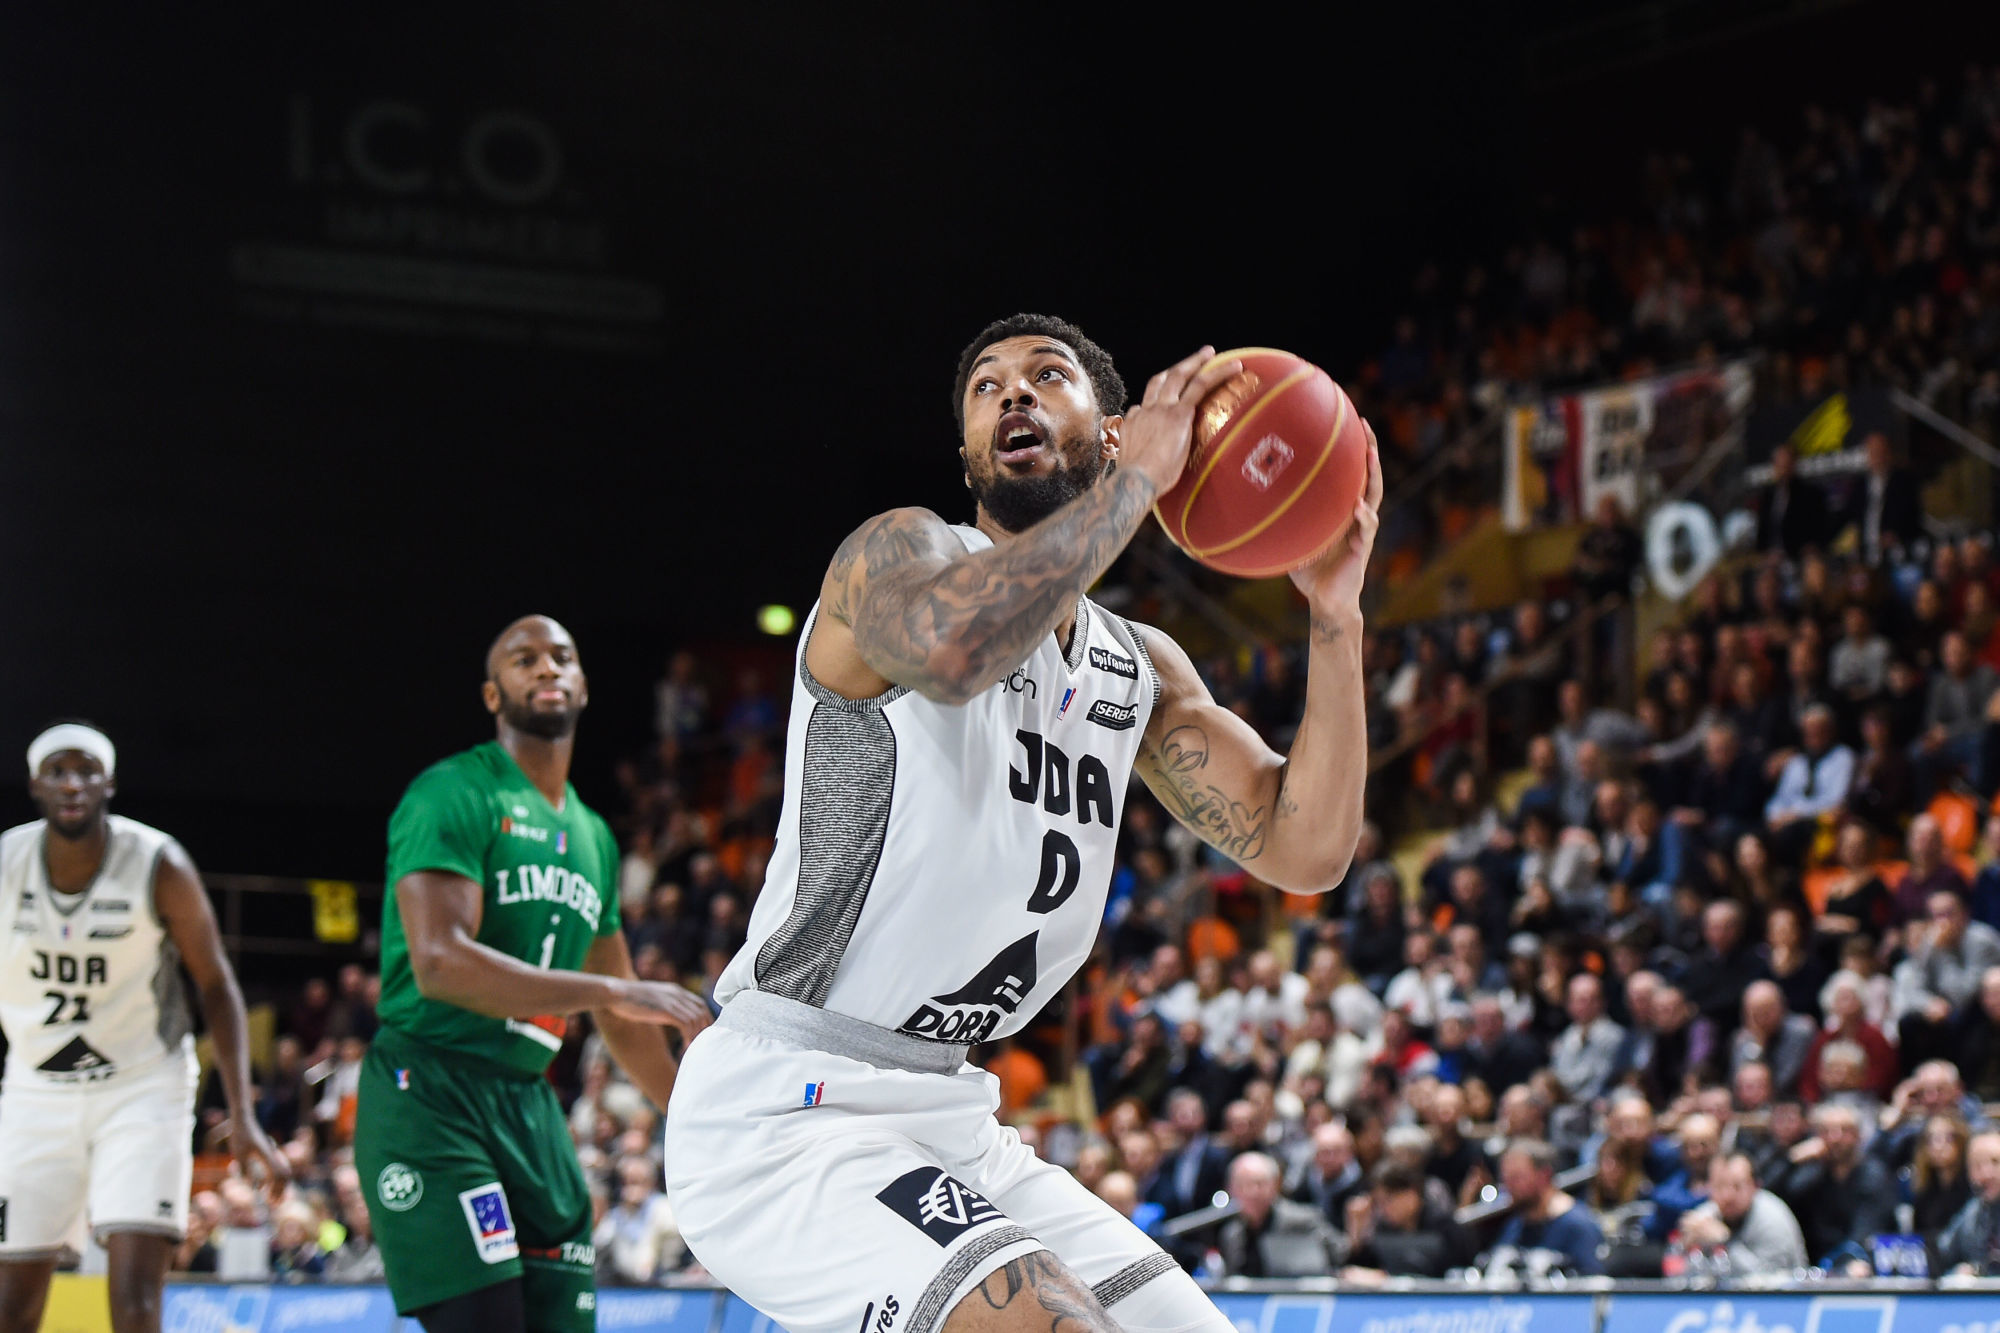 Richard SOLOMON of JDA during the Jeep Elite match during Dijon and Limoges on December 14, 2019 in Dijon, France. (Photo by Vincent Poyer/Icon Sport) - Richard SOLOMON - Dijon (France)